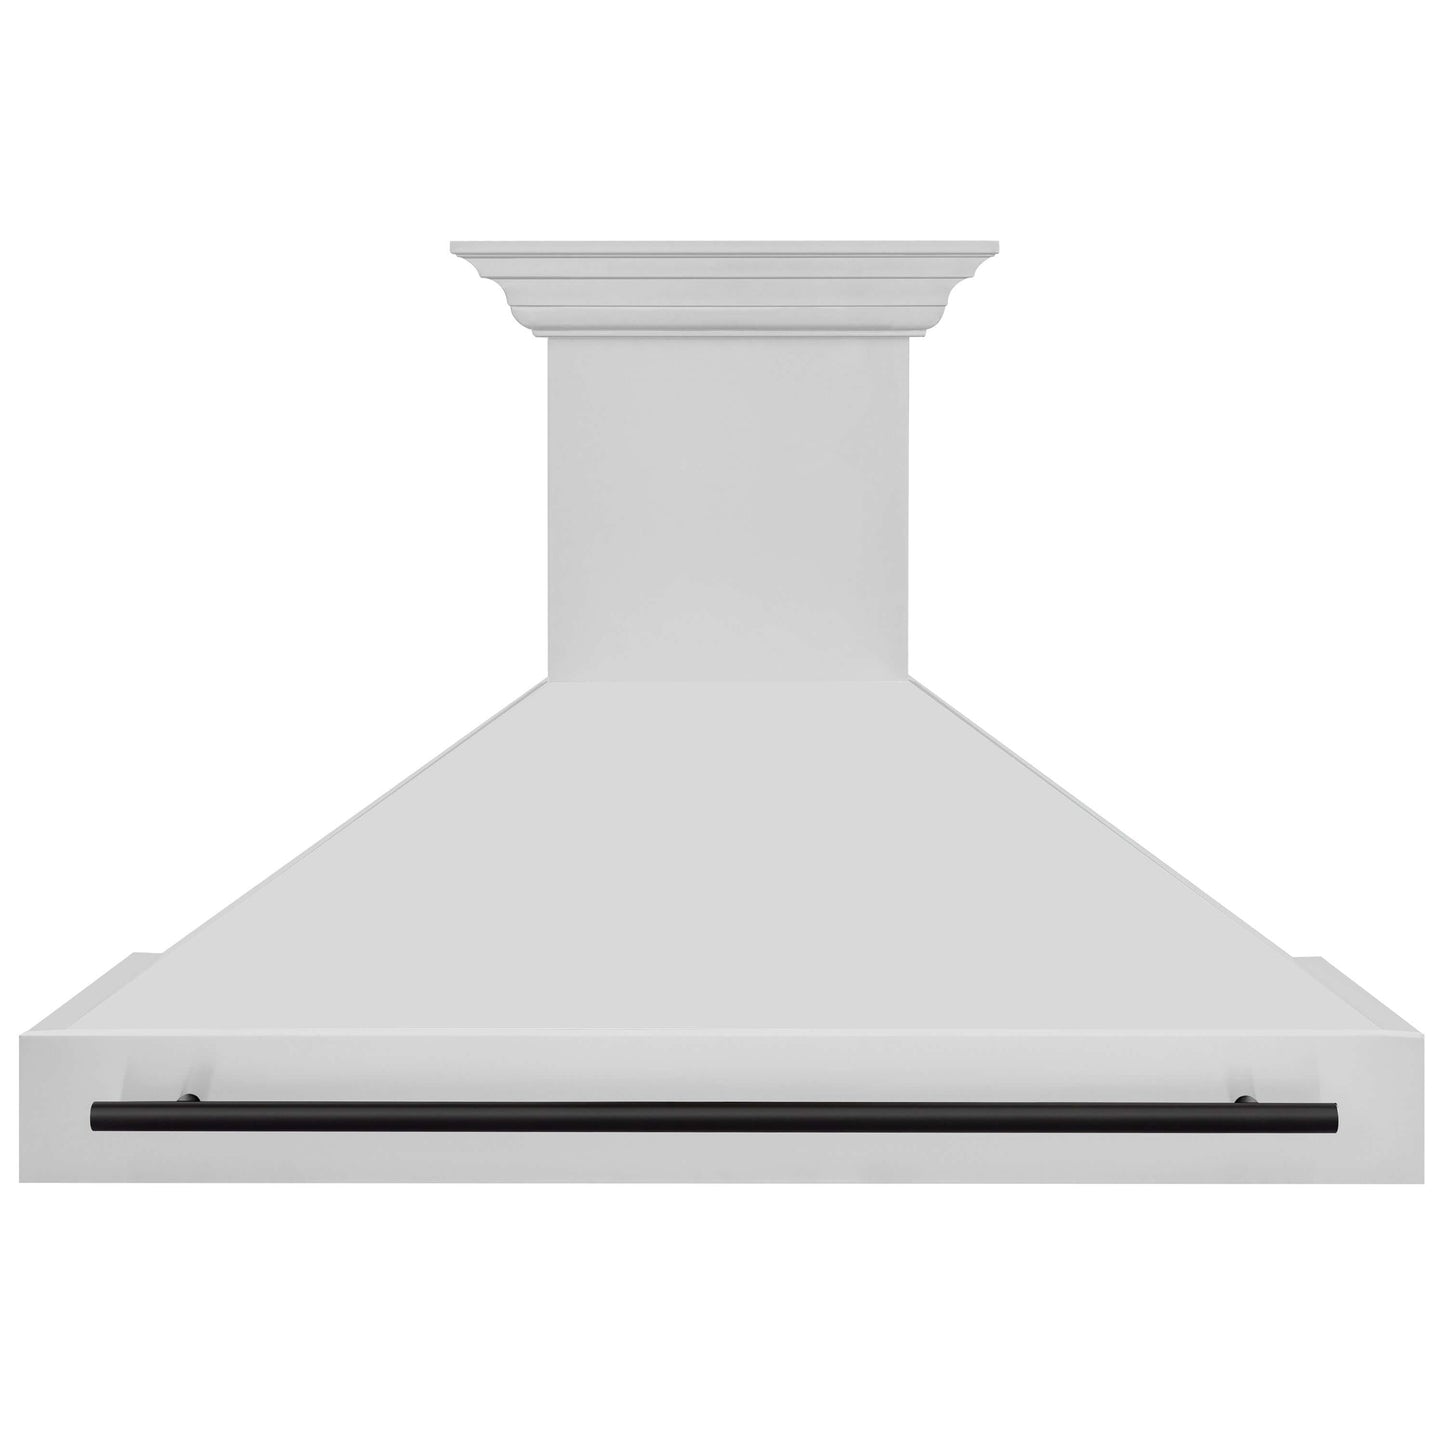 ZLINE 48 in. Autograph Edition Stainless Steel Range Hood with Stainless Steel Shell and Matte Black Handle (8654STZ-48-MB)